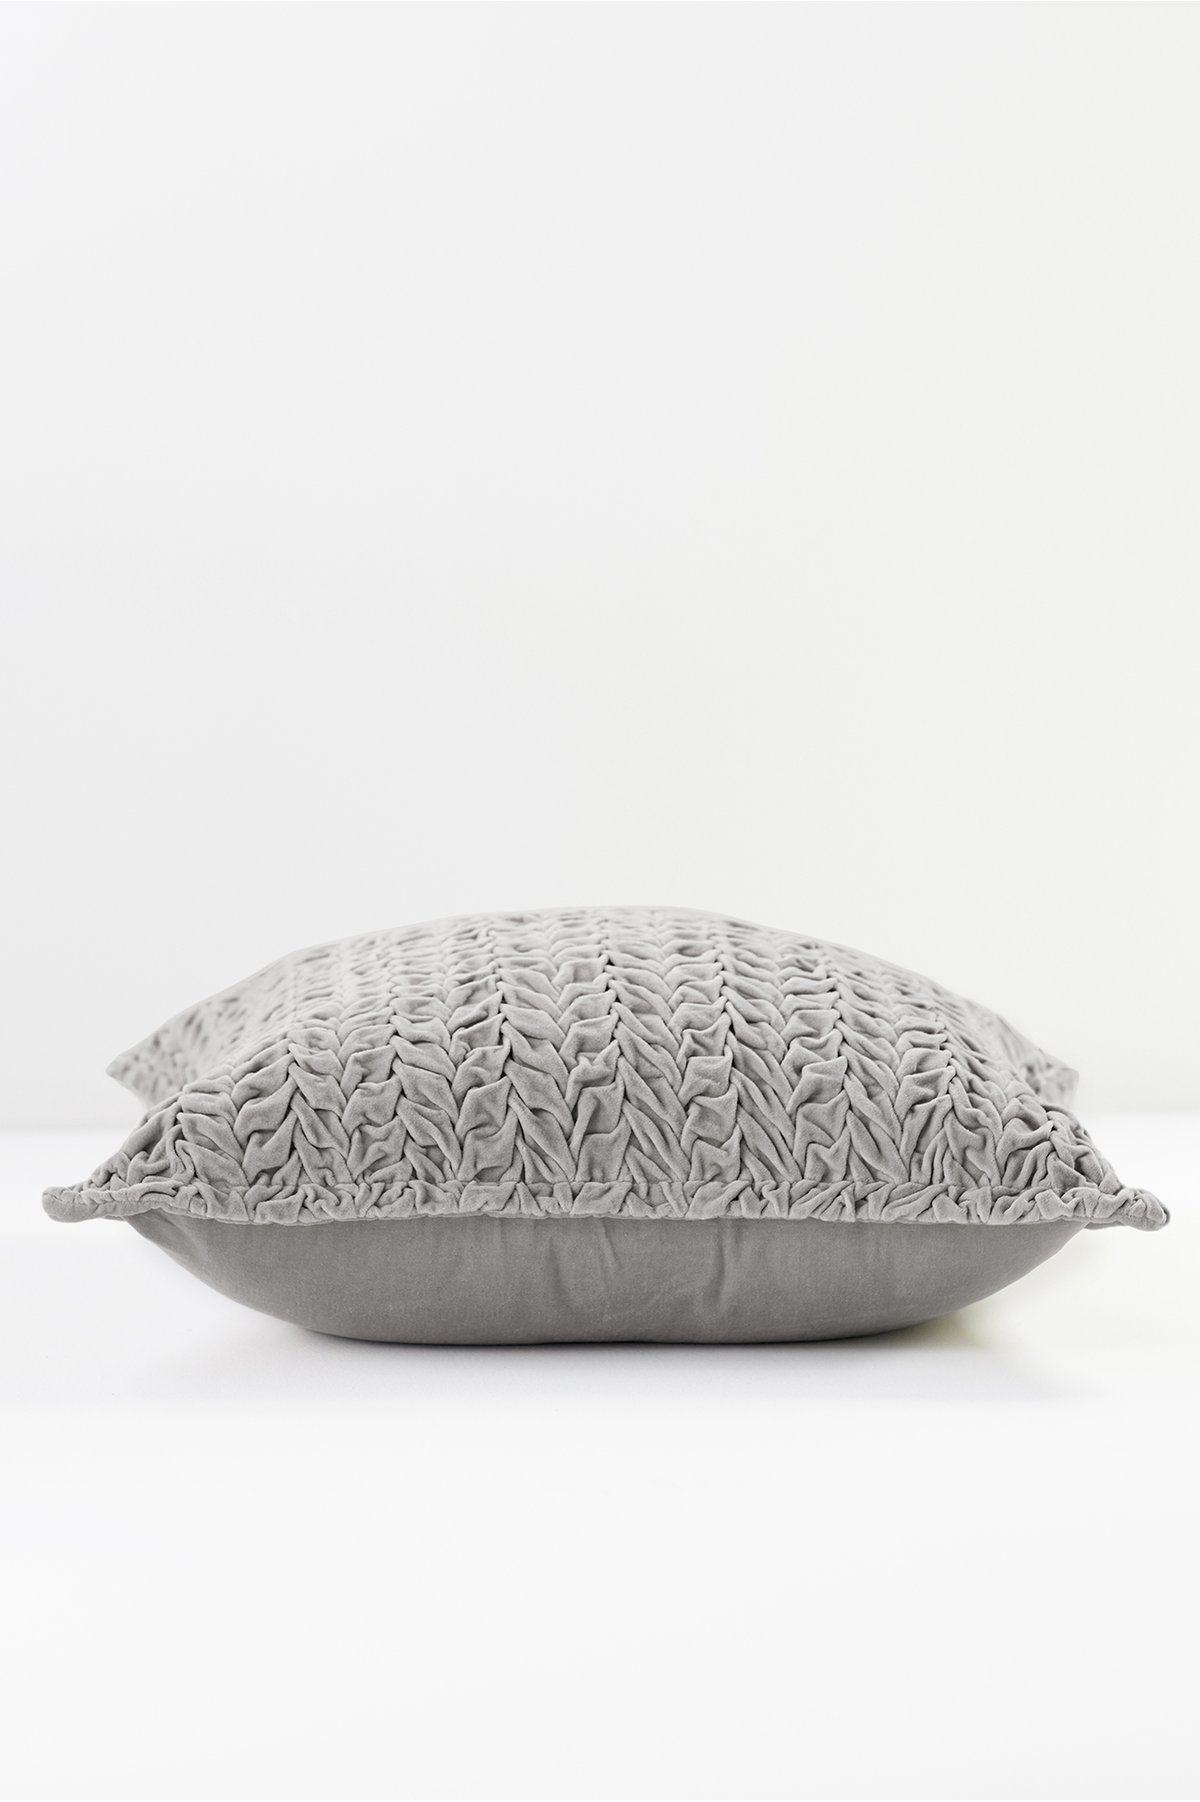 Trenza Square Pillow by Soft Surroundings, in Grey